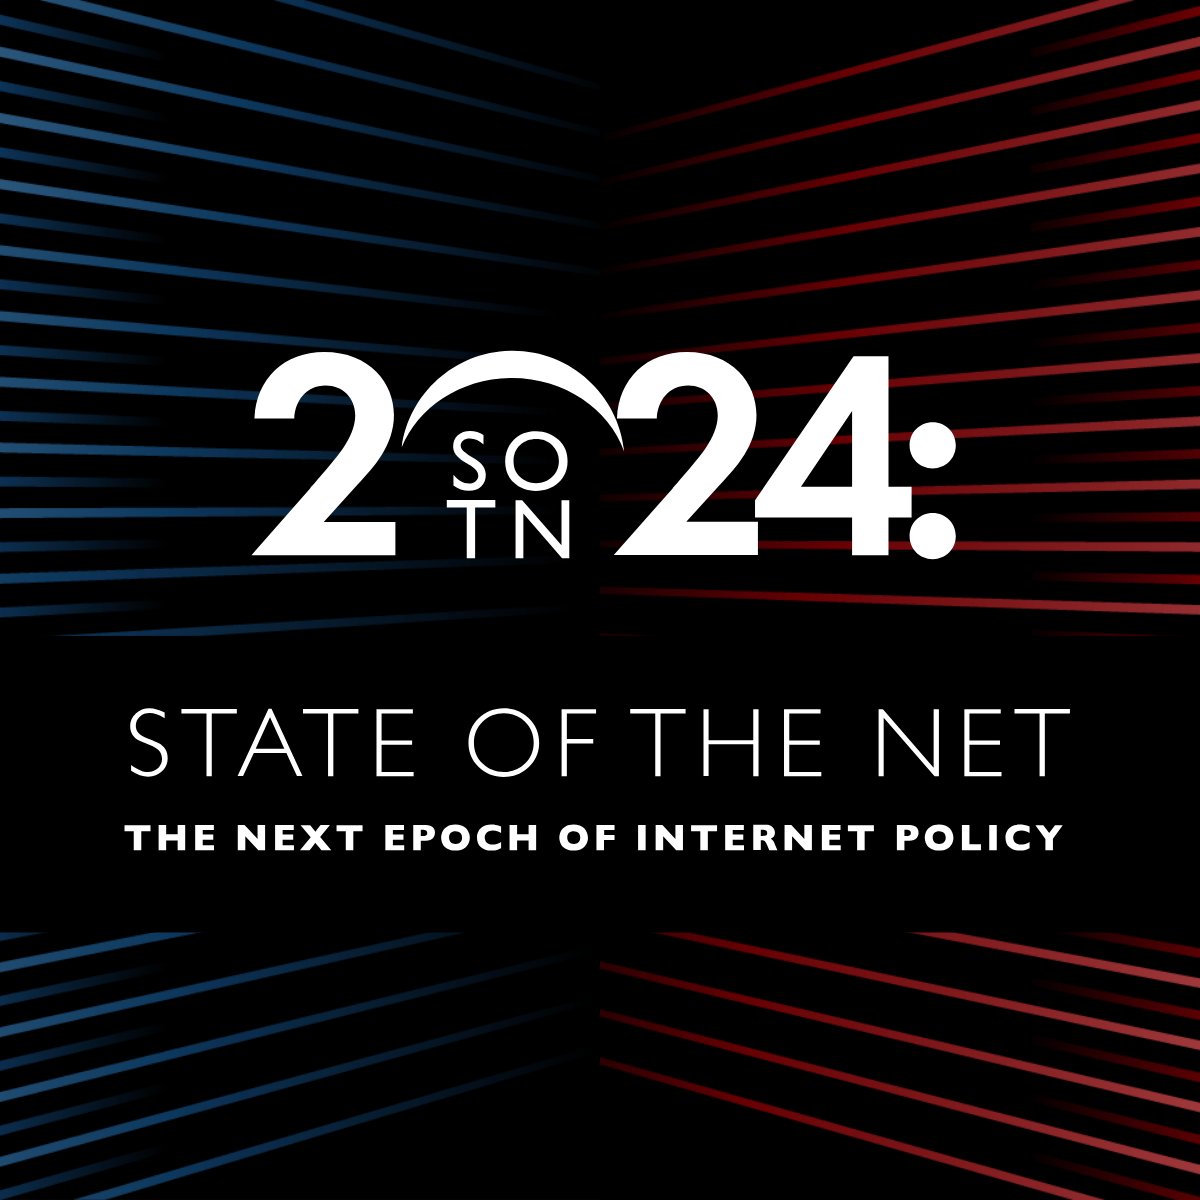 🚨TODAY State of the Net 2024 officially kicks off! Follow #SOTN2024 on social media to stay up to date on today’s panels, keynote addresses and lightning talk sessions focused on key issues facing #TechPolicy. Follow our agenda here: sotn24.sched.com